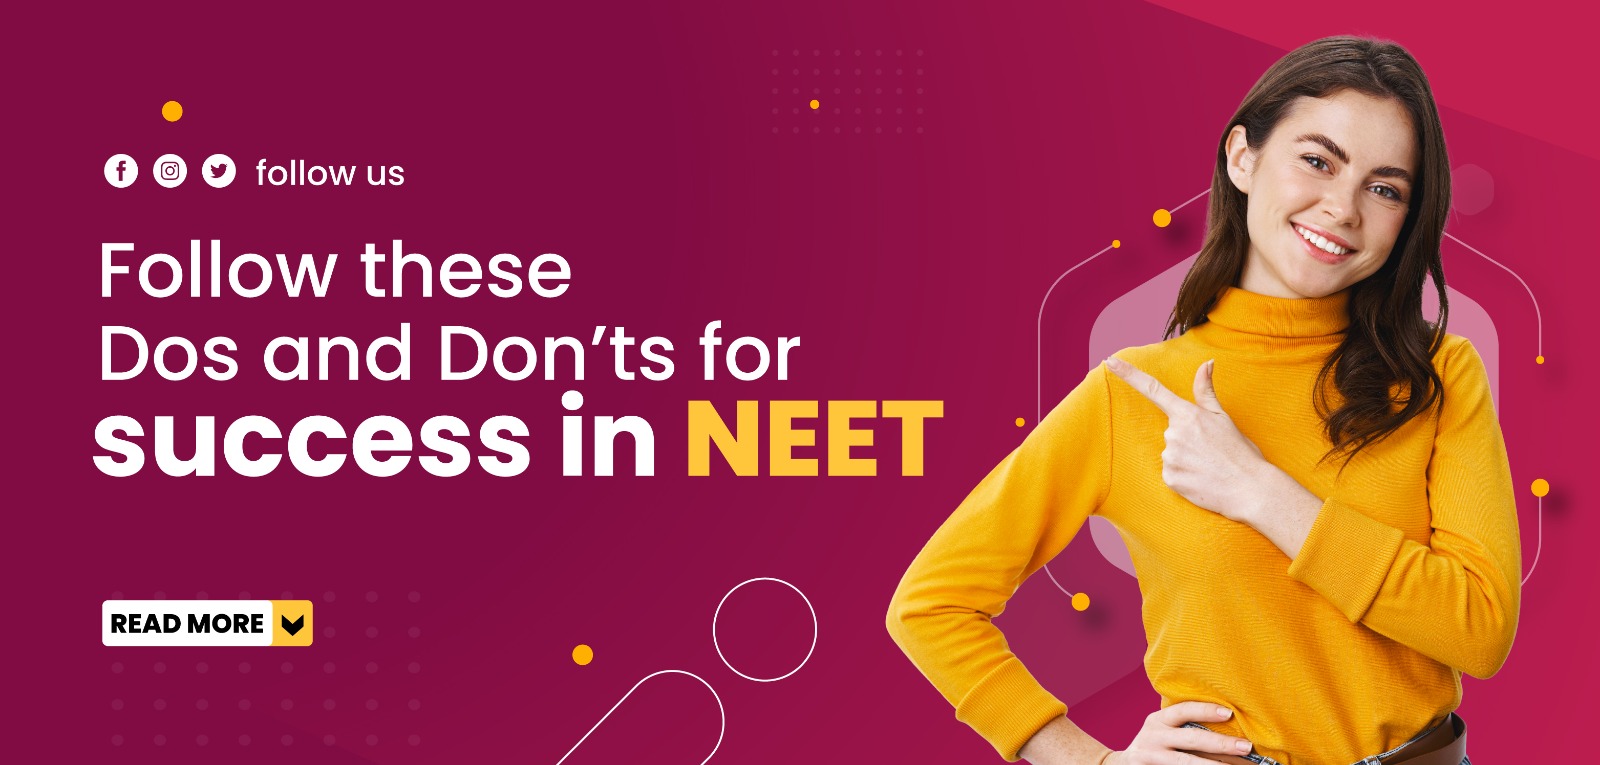 Follow these Dos and Don’ts for success in NEET